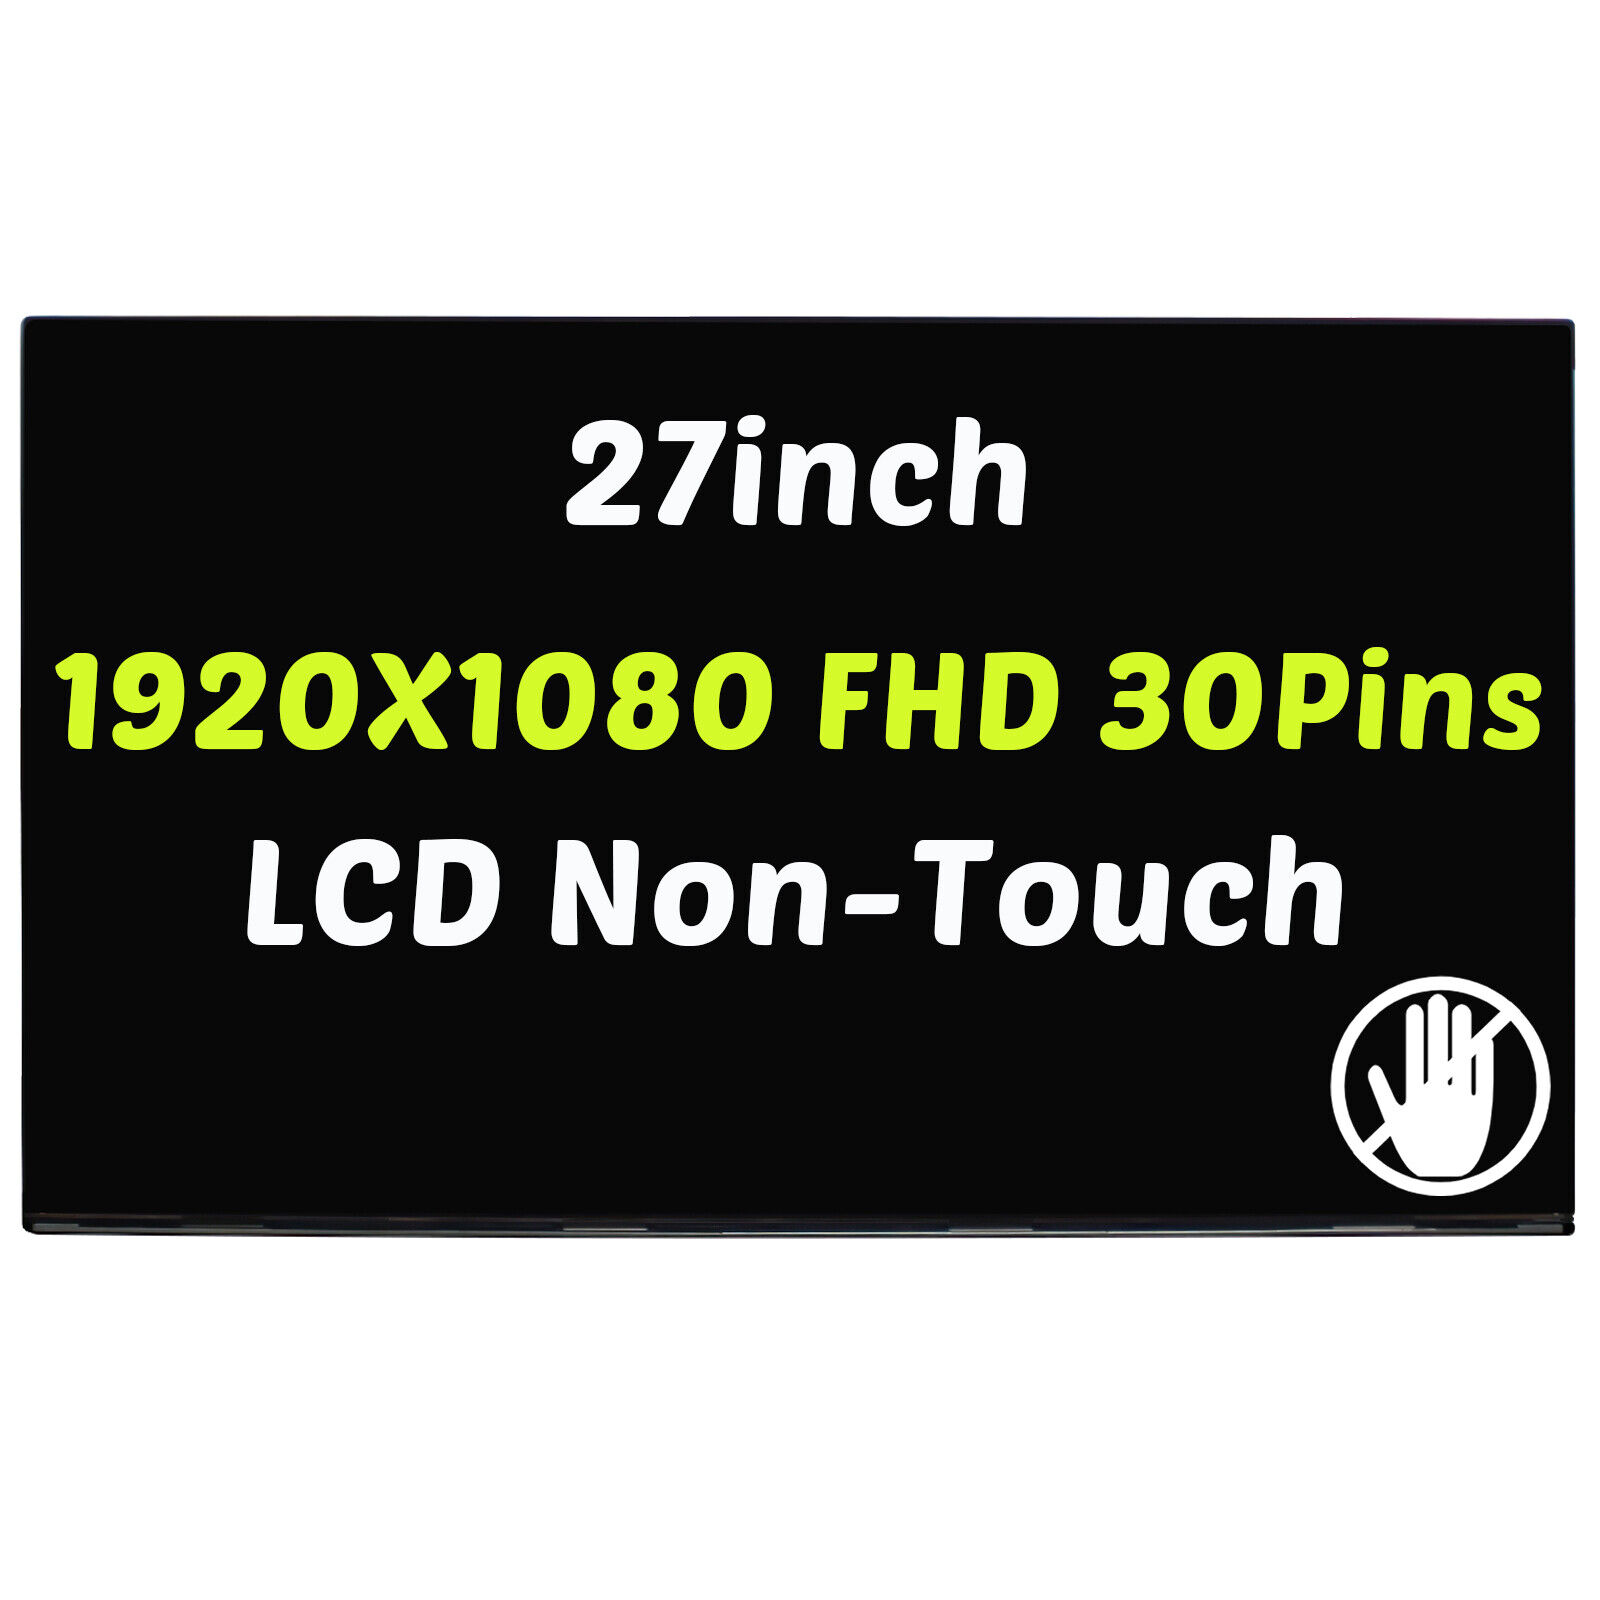 27inch WLED LCD Display FHD 30Pins Non-Touch for HP 27-C 27-CB0026 27-CB0030